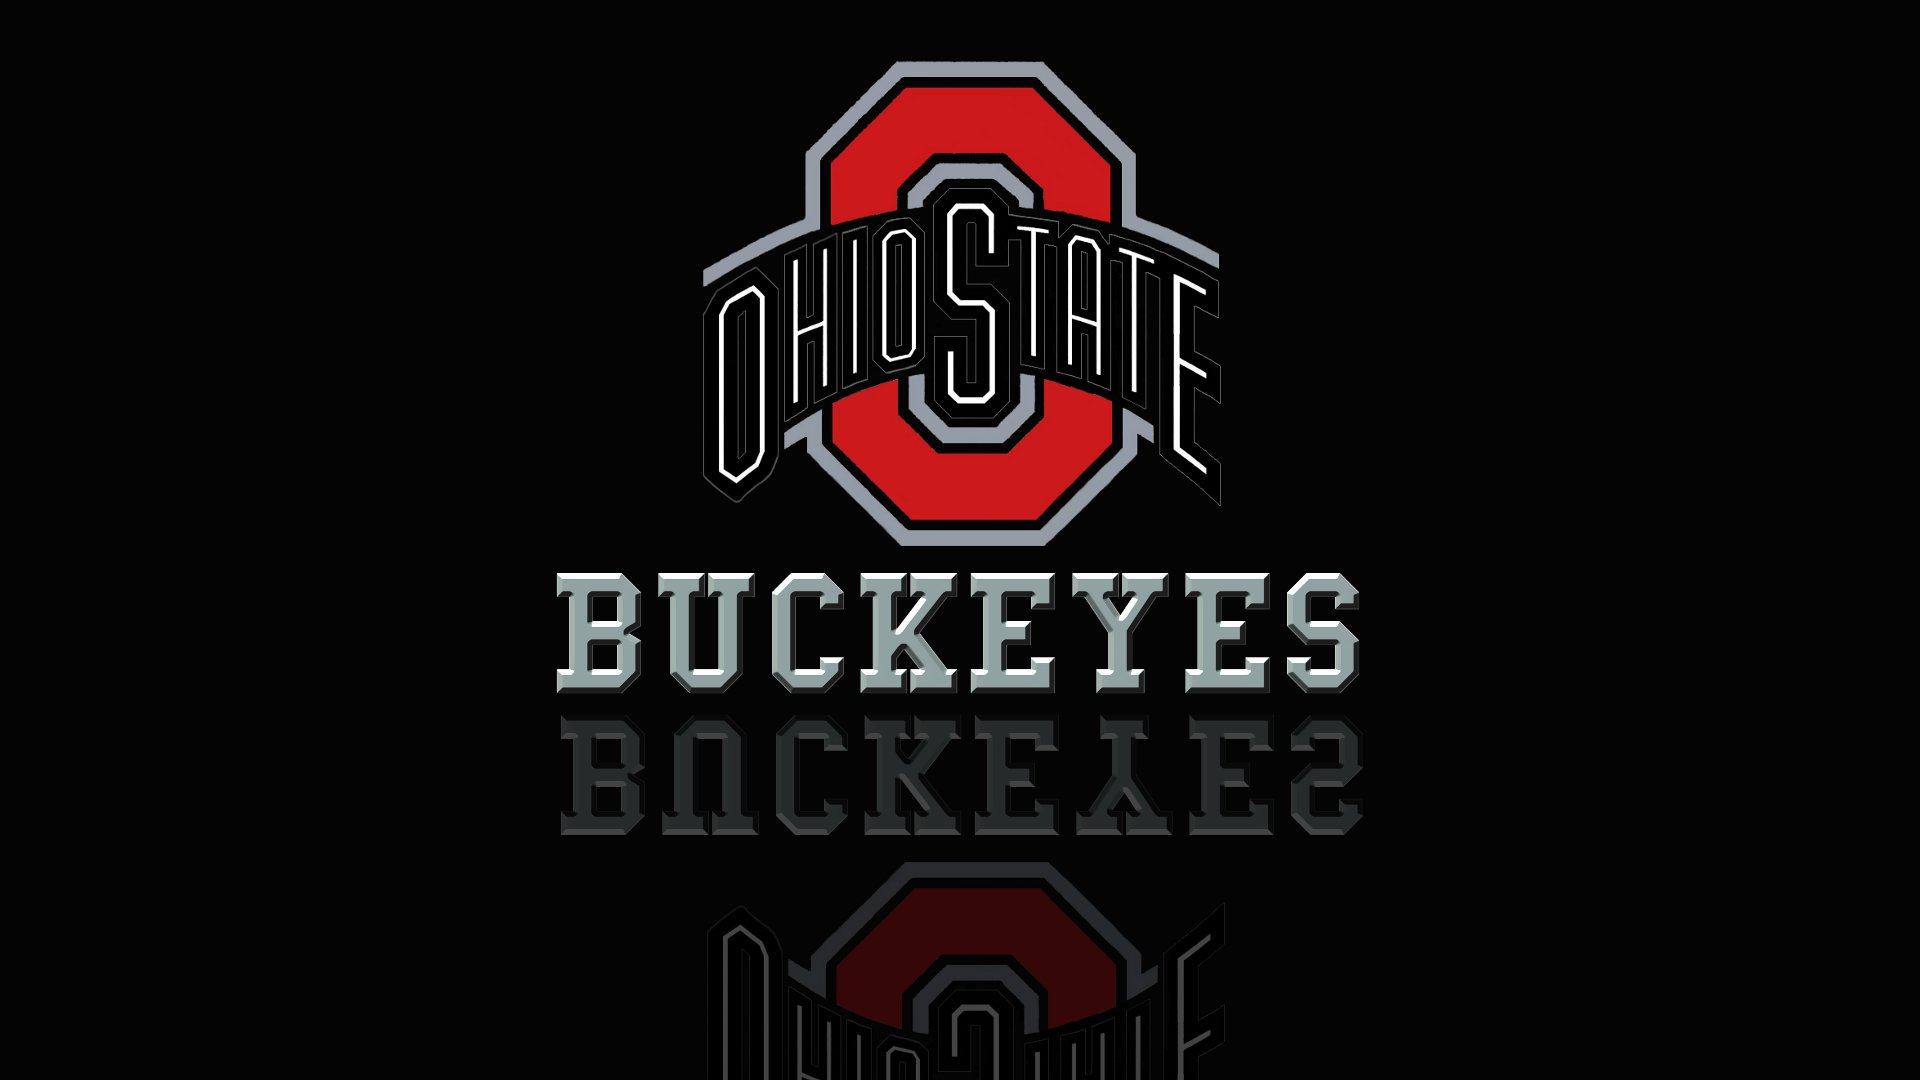 Ohio State Football images OSU Wallpaper 150 HD wallpaper and